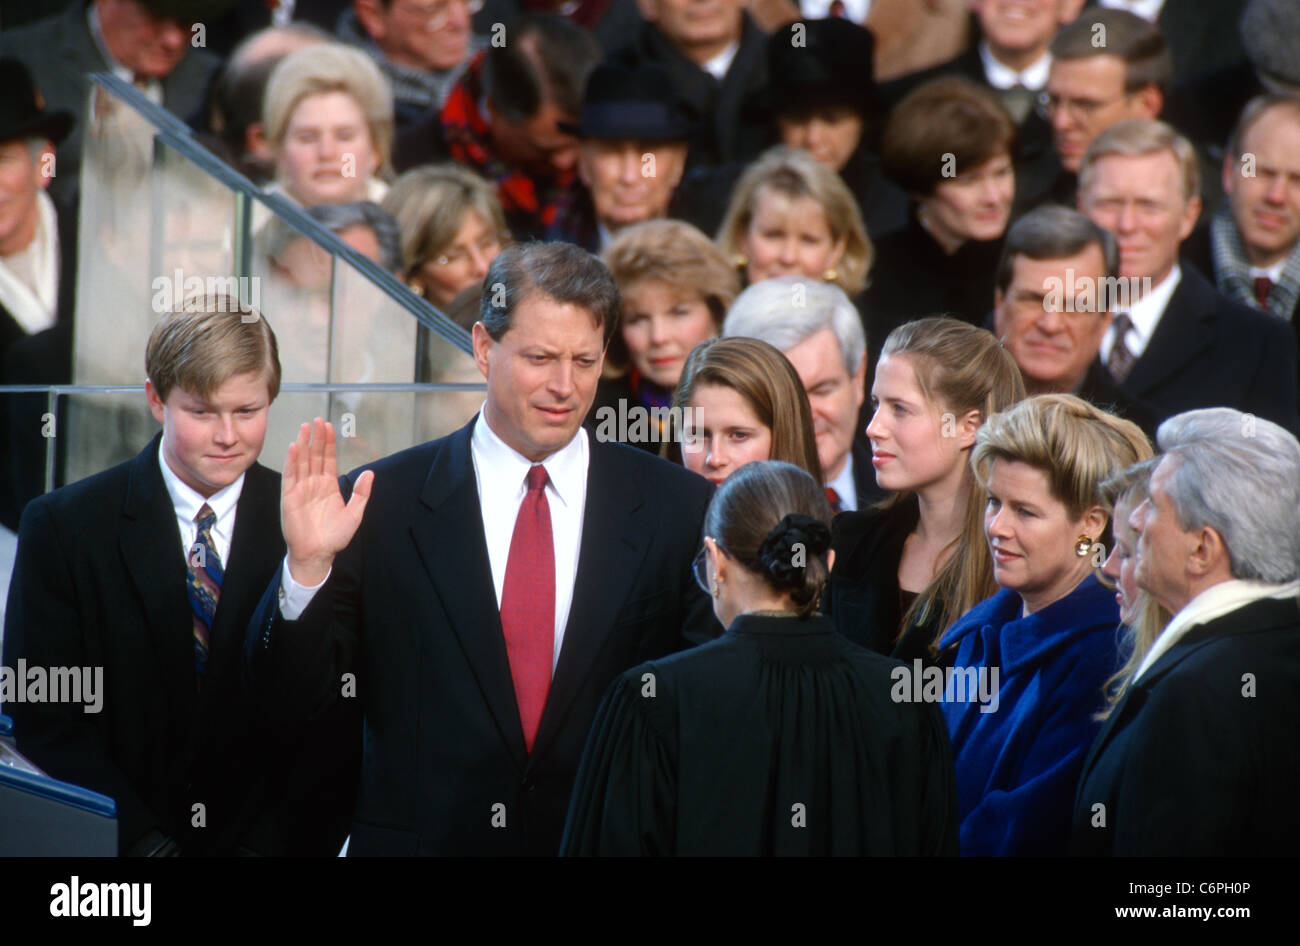 vice-president-al-gore-is-sworn-in-for-his-second-term-january-20-C6PH0P.jpg